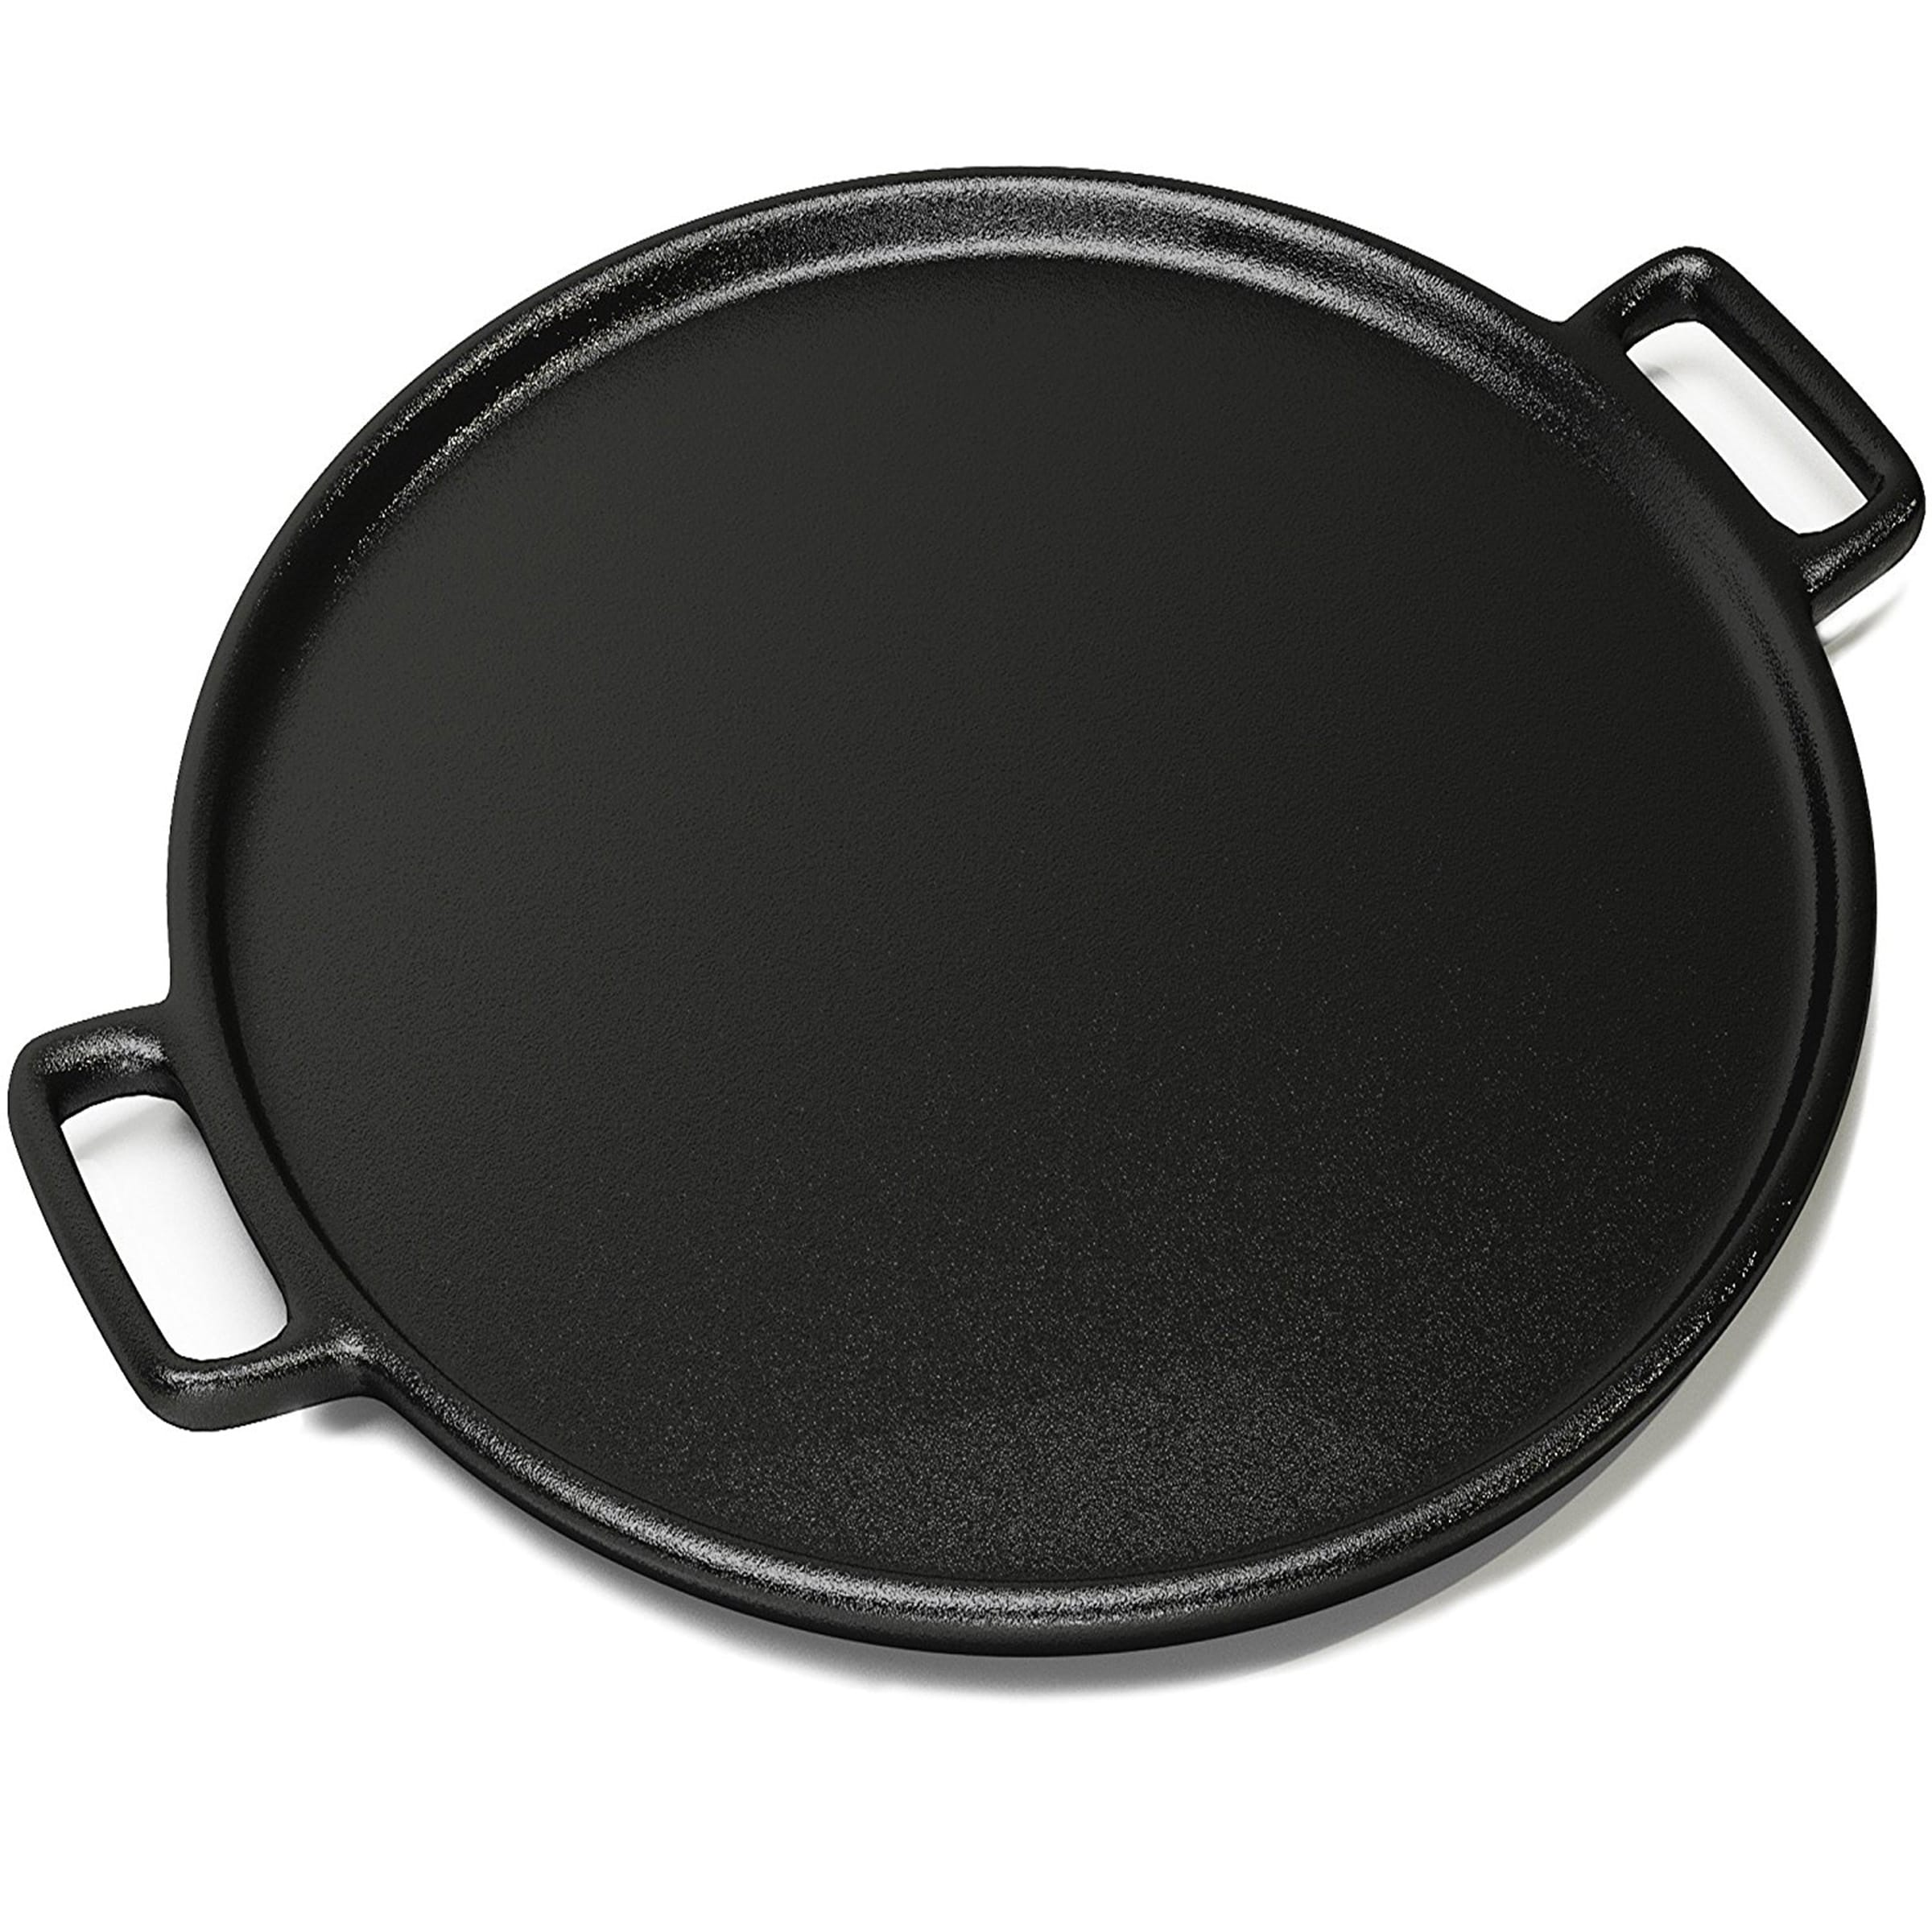 https://ak1.ostkcdn.com/images/products/is/images/direct/a7a0719a11e5fa7f83f53acccc668ab019558eba/Cast-Iron-Pizza-Pan-14%E2%80%9D-Skillet-for-Cooking%2C-Baking%2C-Grilling-Durable-Home-Complete.jpg